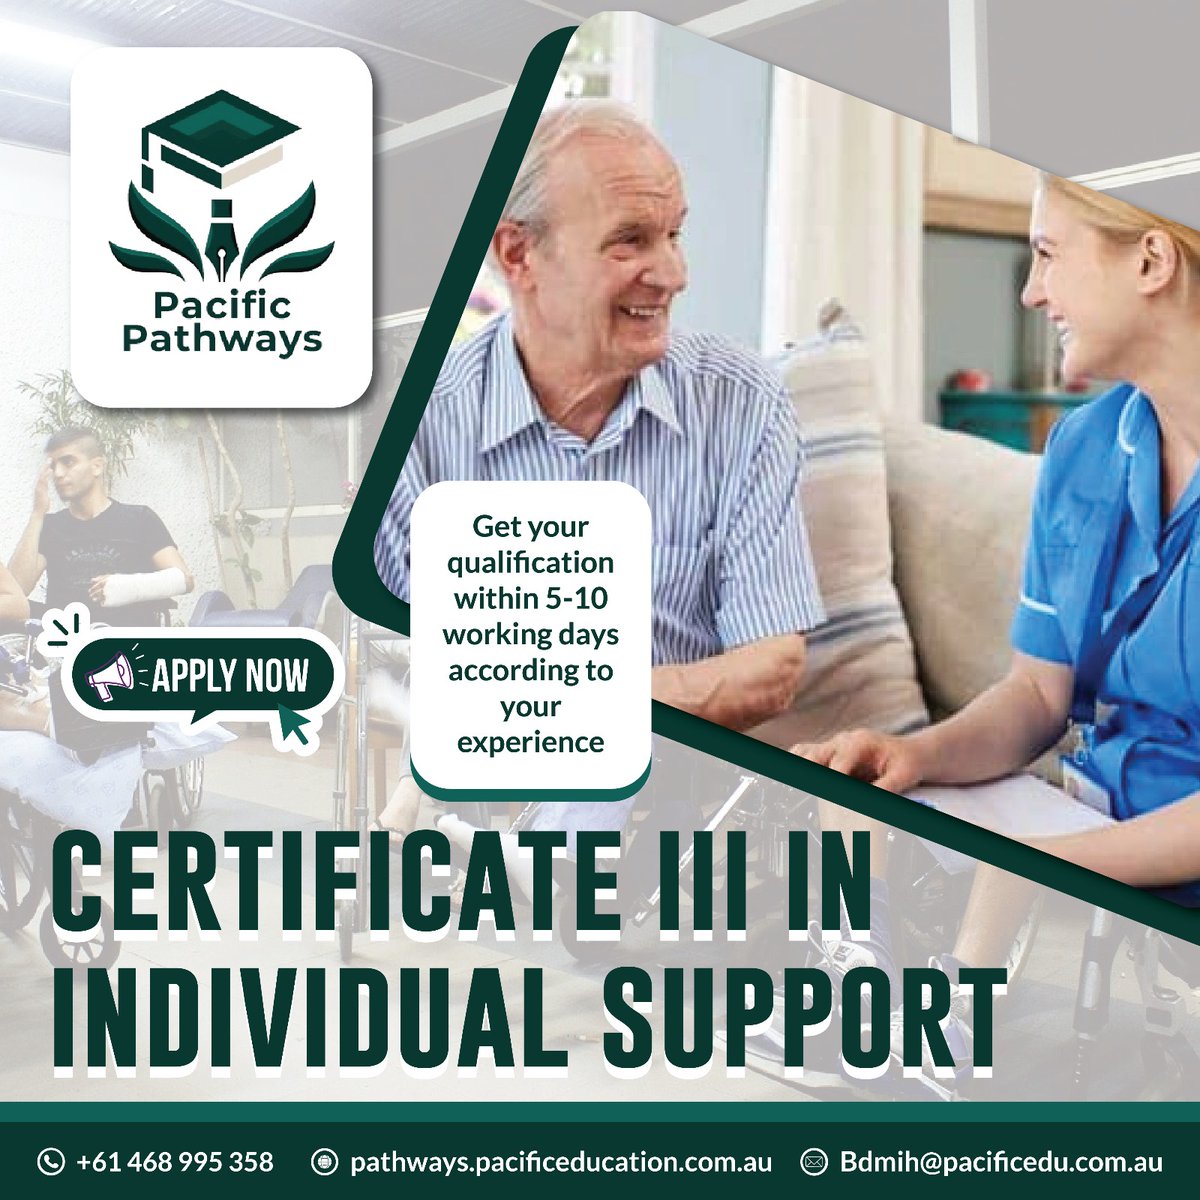 'Transform your hands-on experience into a formal qualification with our RPL for Certificate III in Individual Support. Contact Us:
Call: 468 995 358
EMail: Bdmih@pacificedu.com.au 
#australia #certicertificate #Wolves #pacific_pathways #certificate #RPL #IndividualSupport